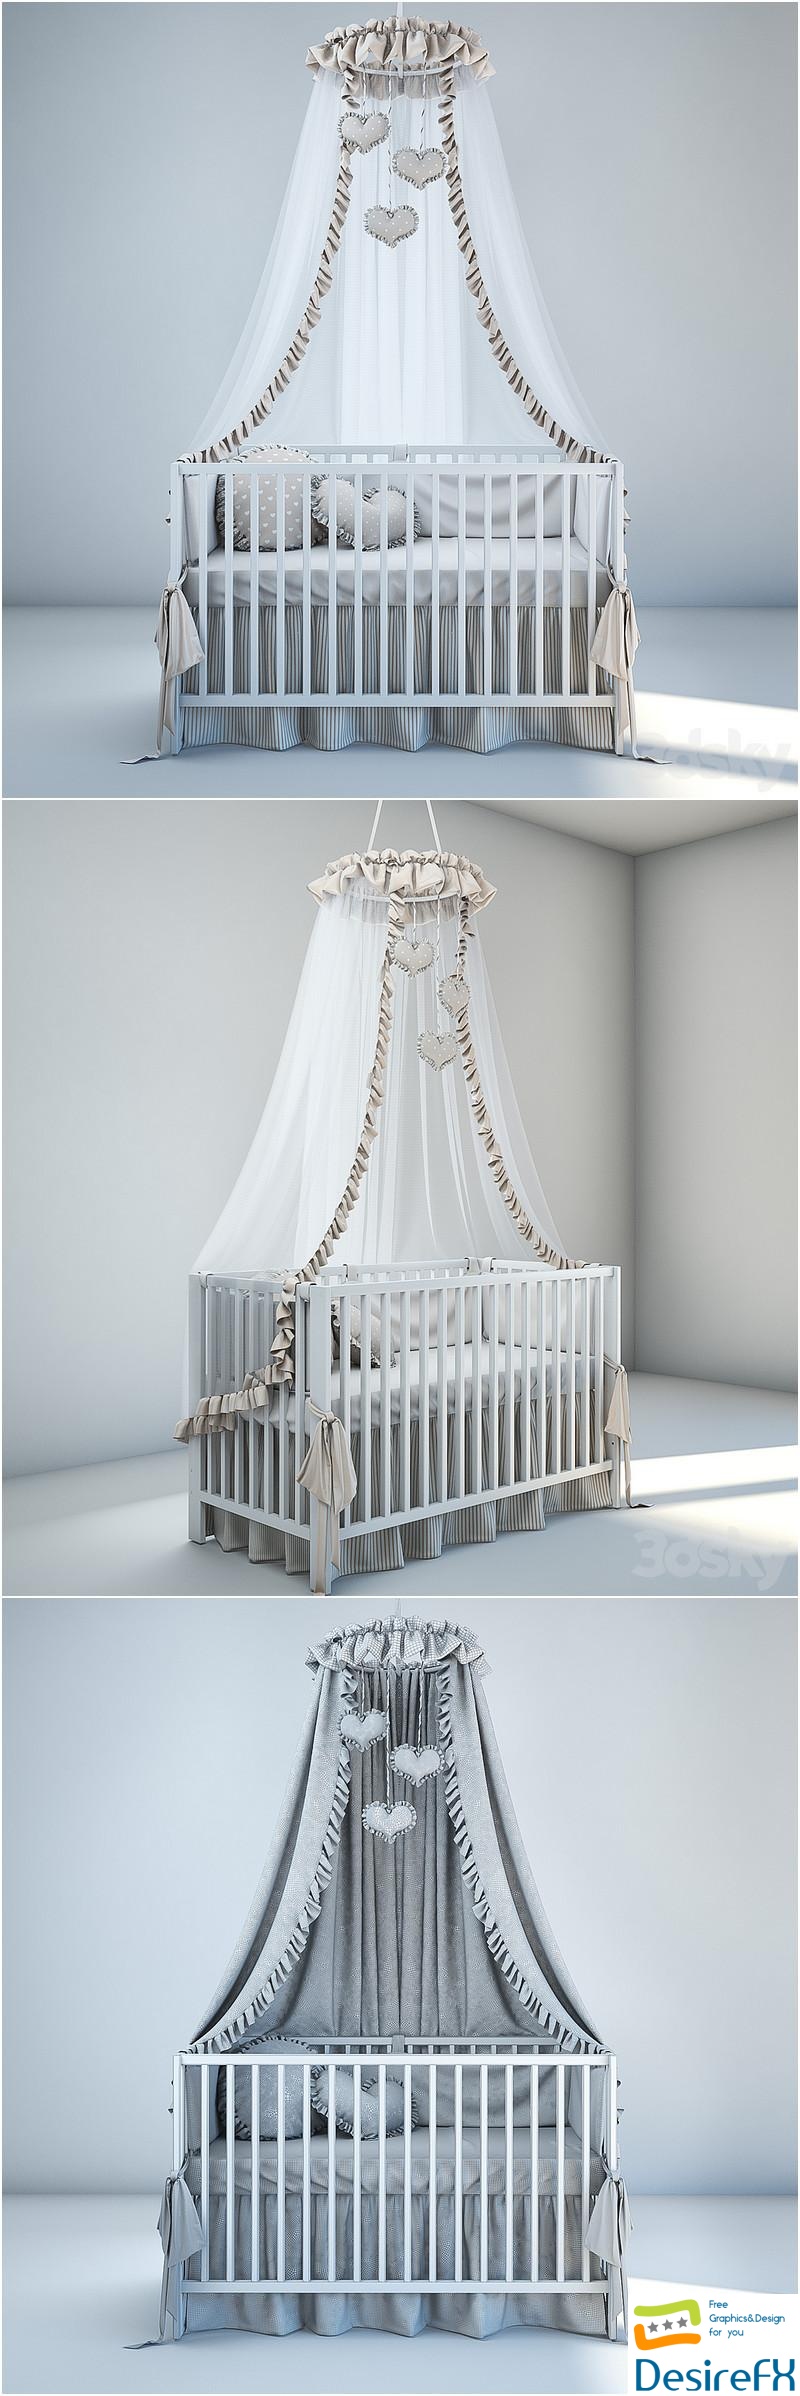 Baby bedding and bed IKEA 3D Model